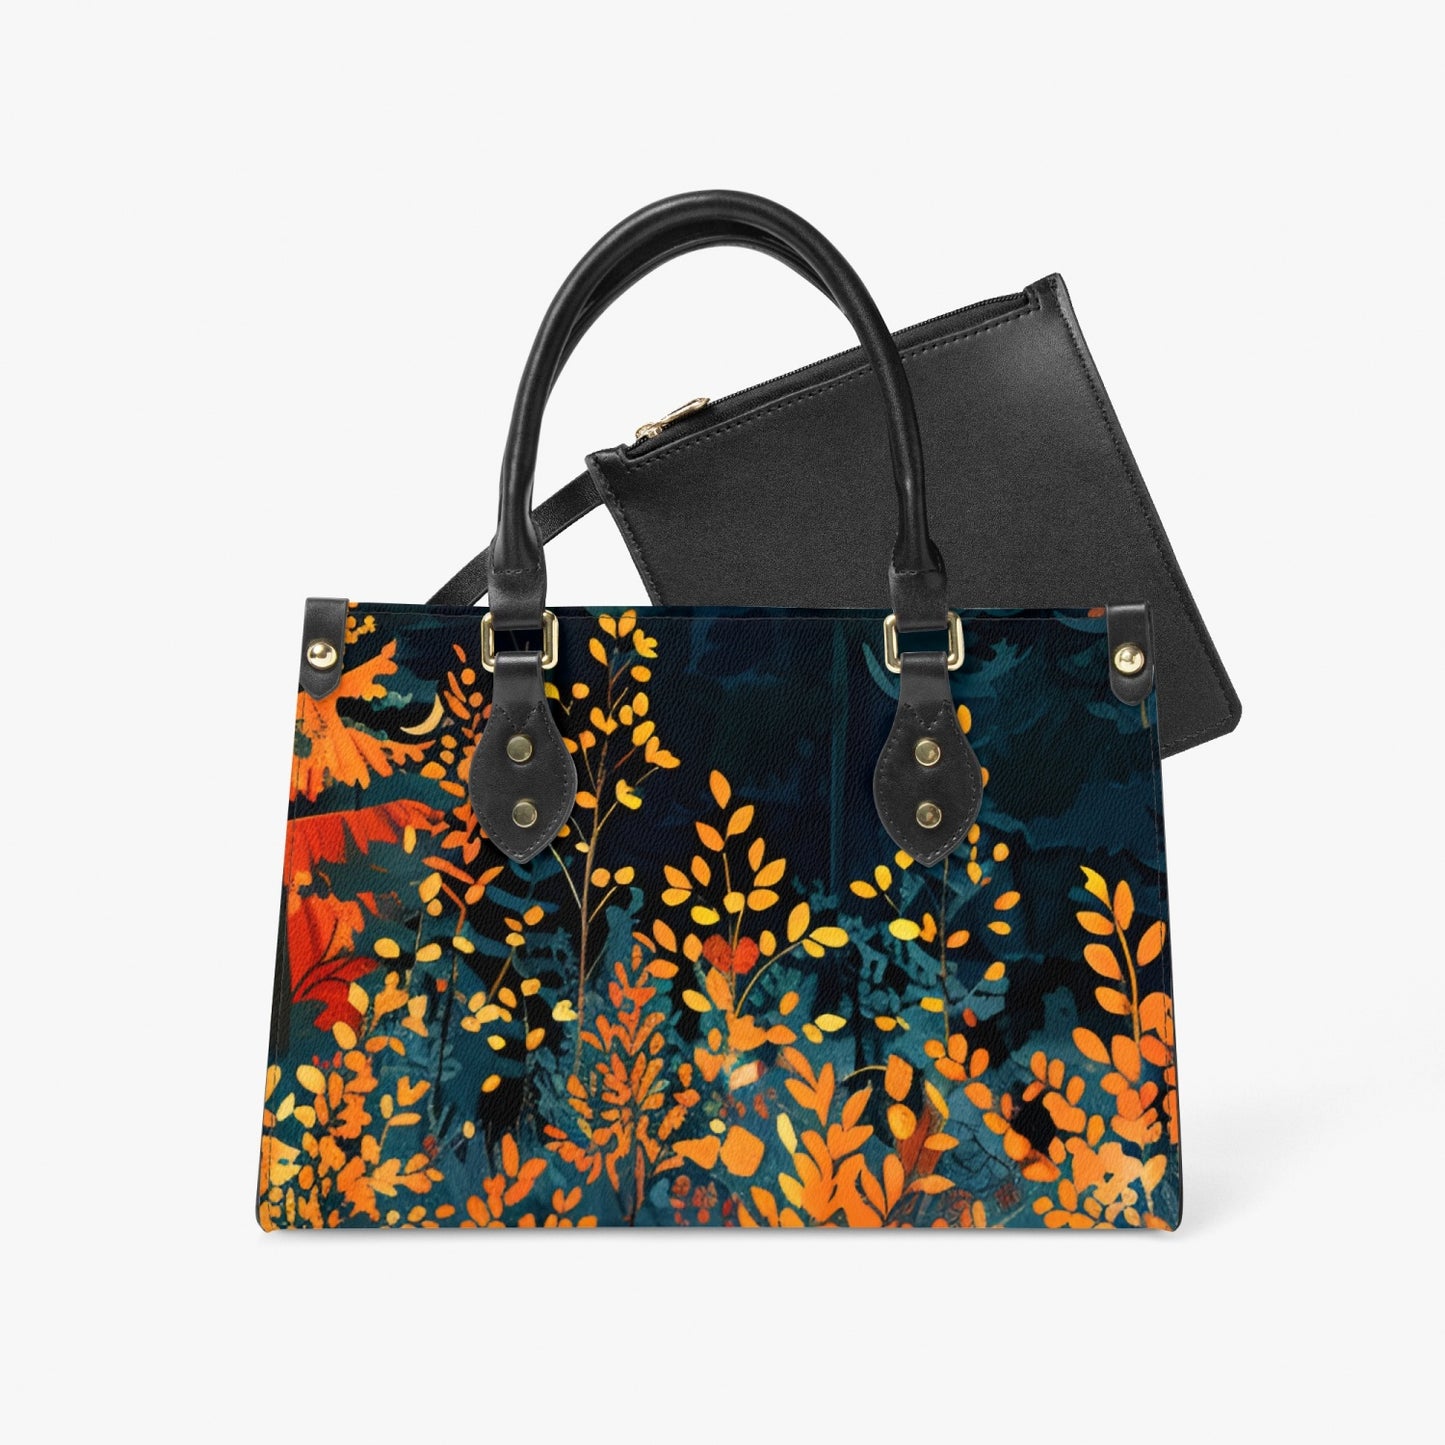 Vegan Leather Tote Bag with Nature Motifs